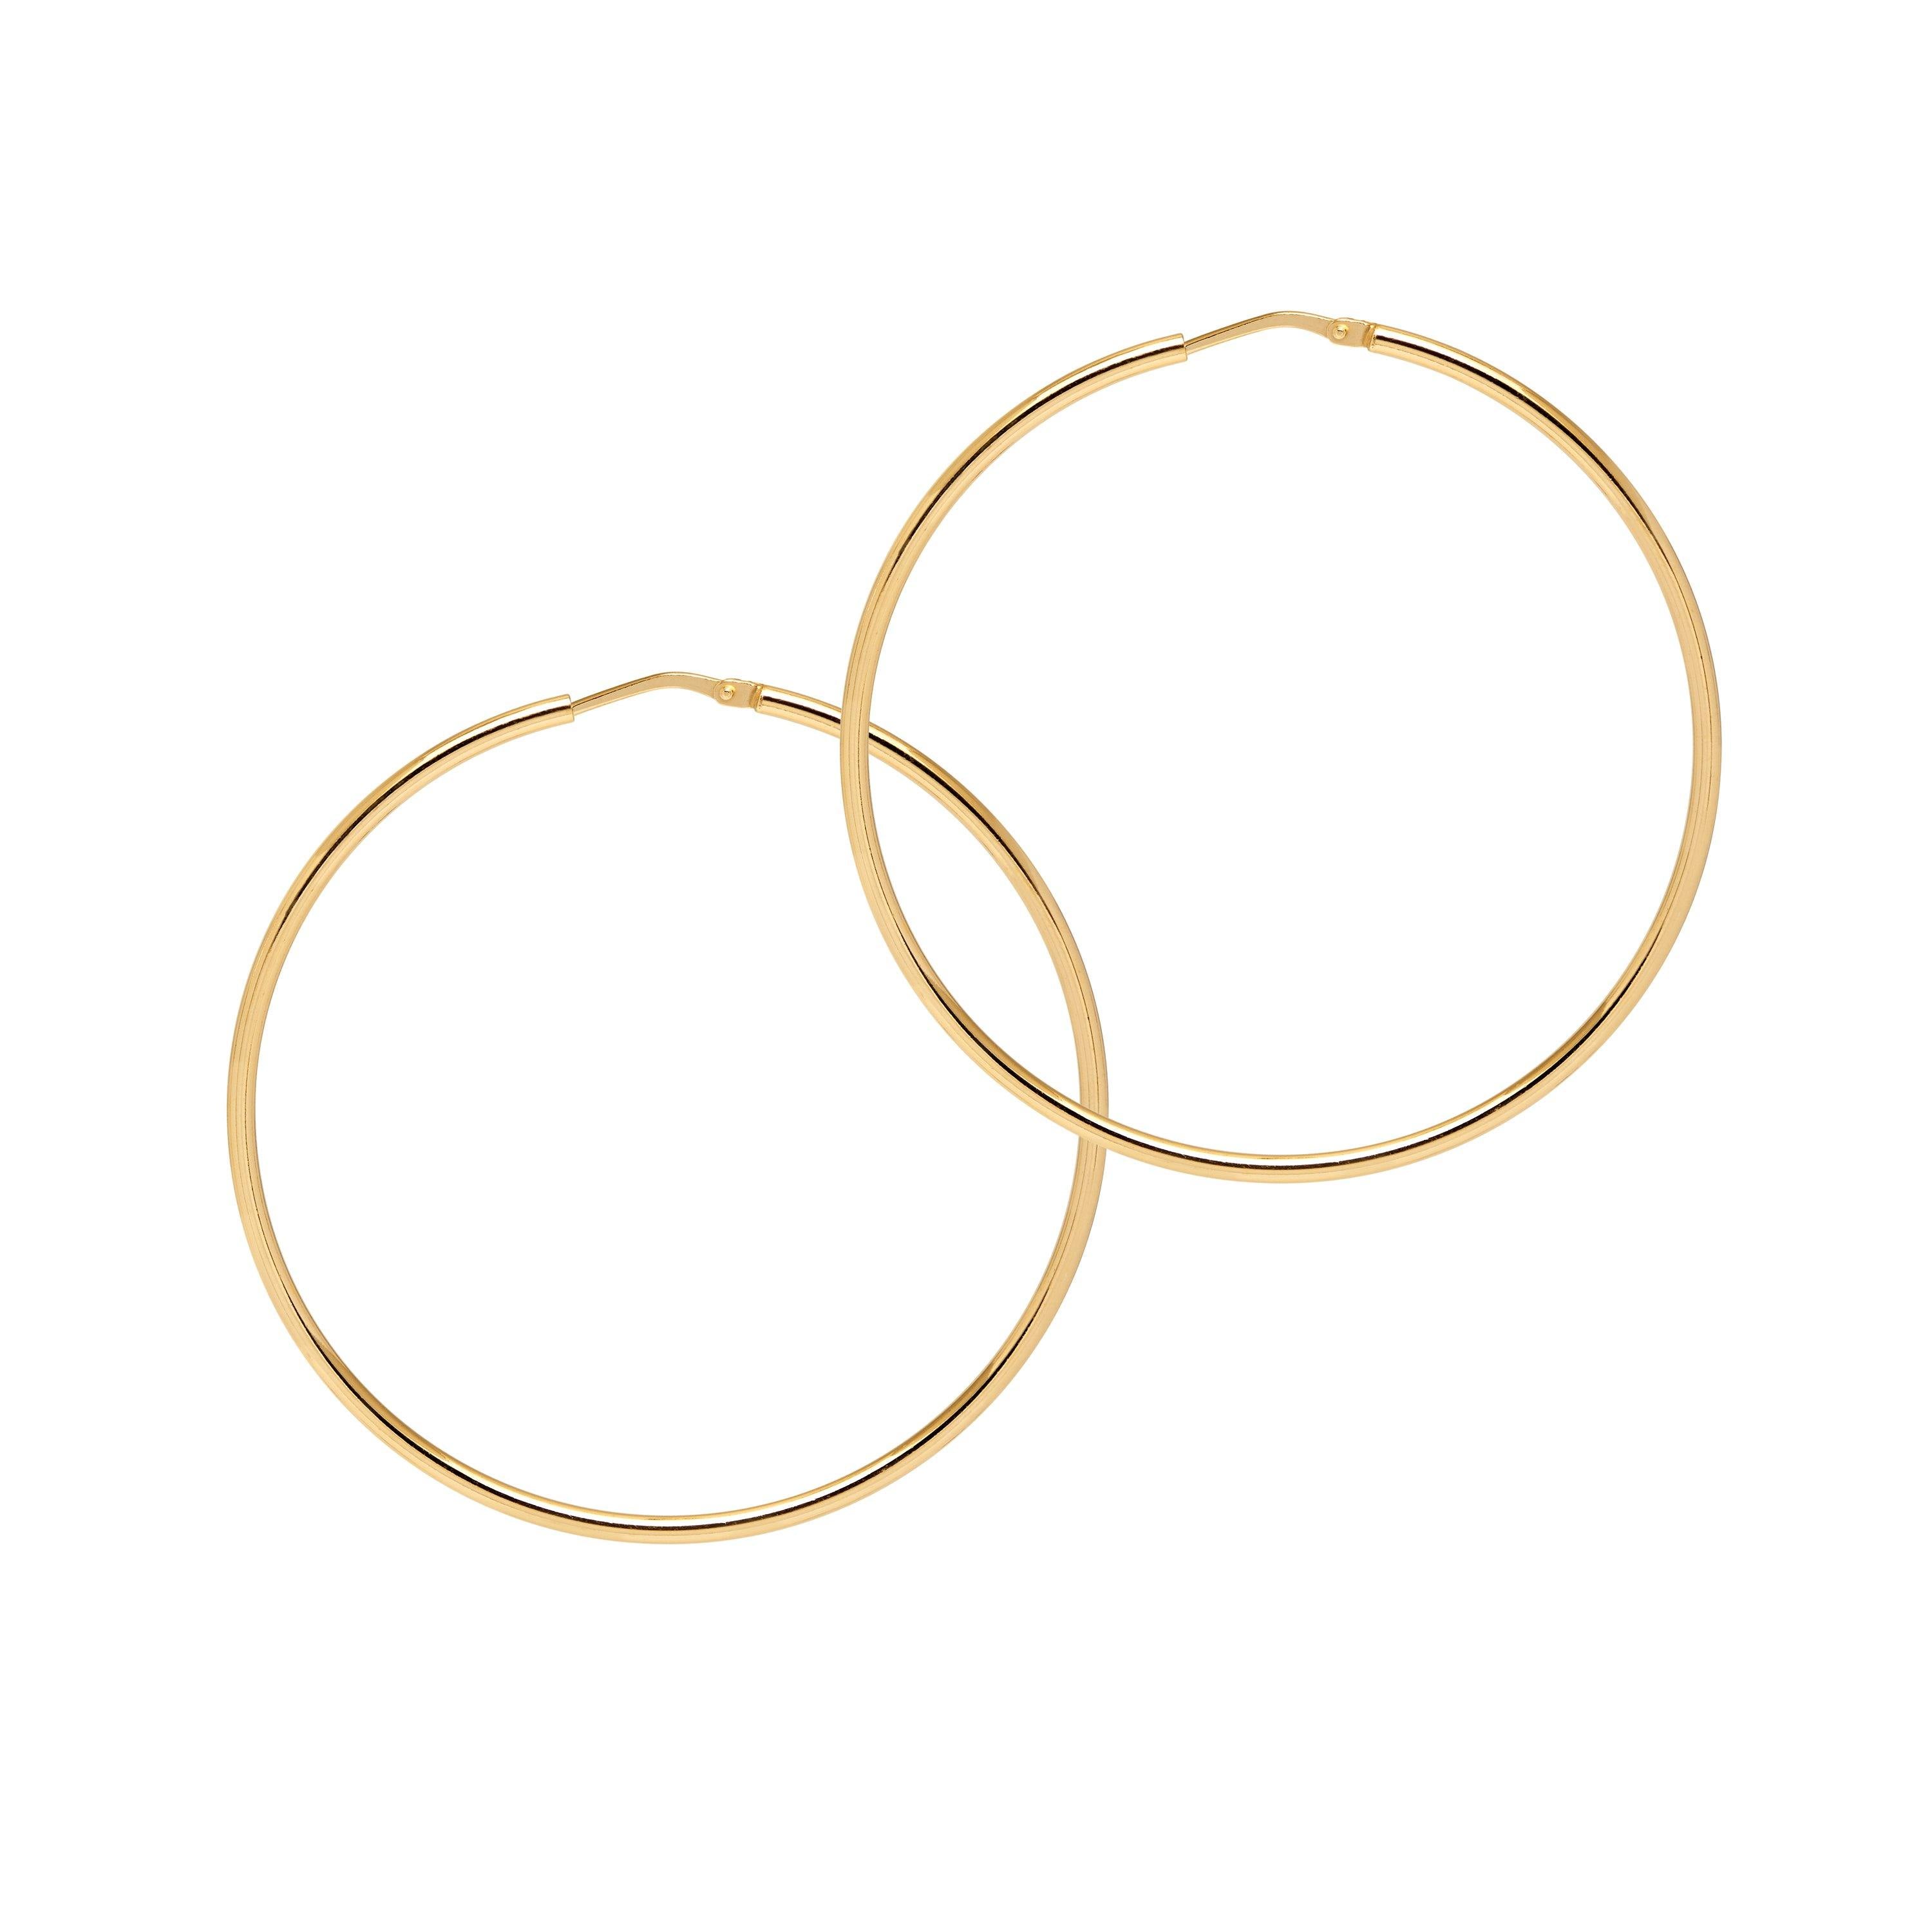 Chica Latina Collection - Gold - THE HOOP STATION